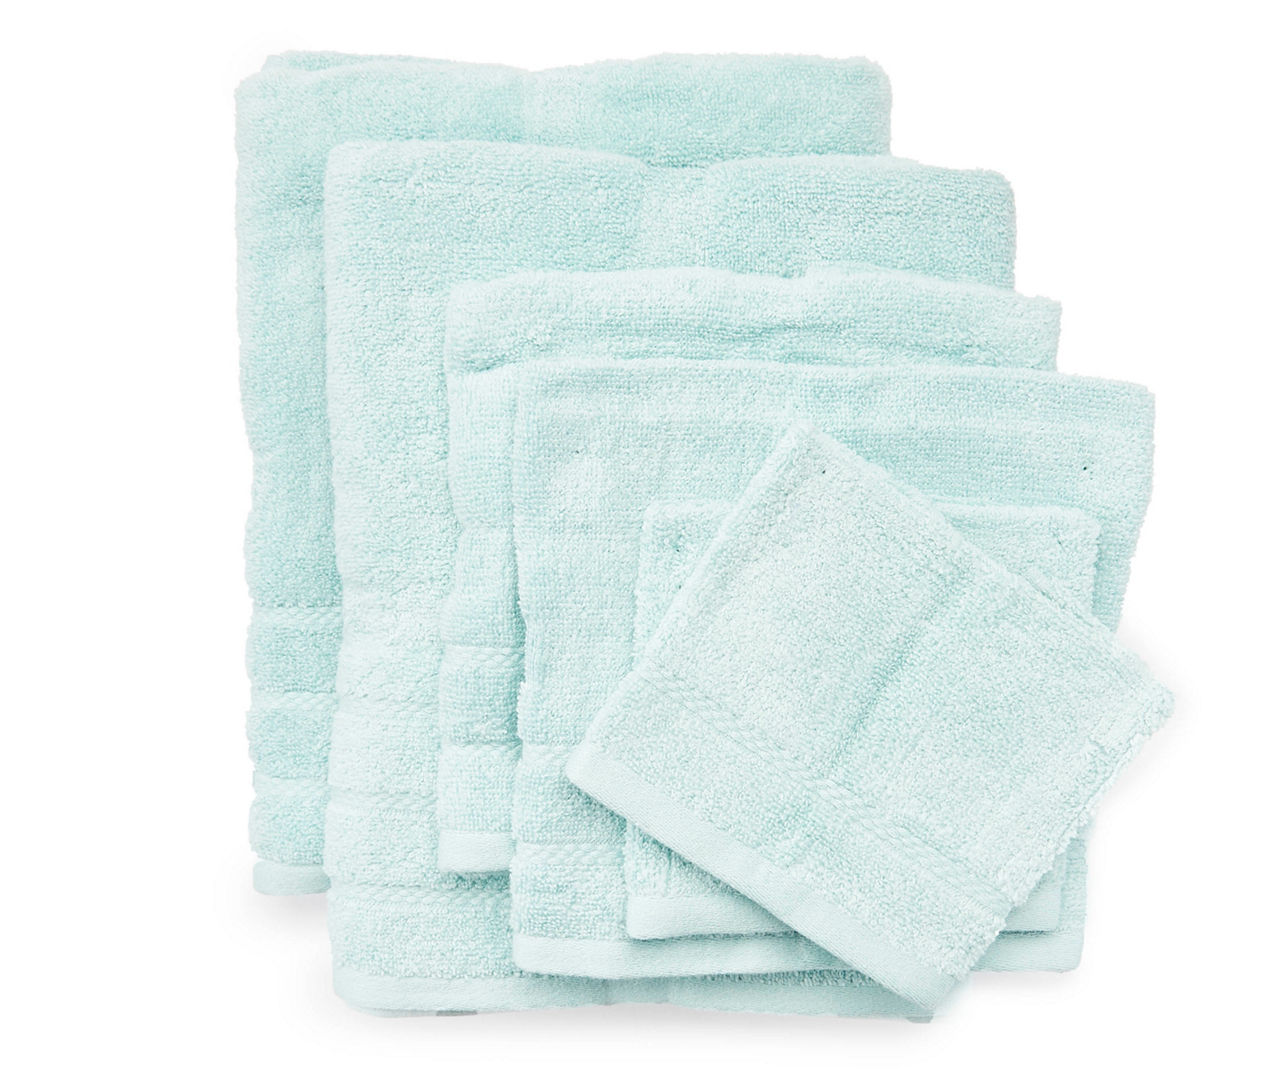 MyTrident Organic 6-Piece Towel Set (Assorted Colors) - Sam's Club